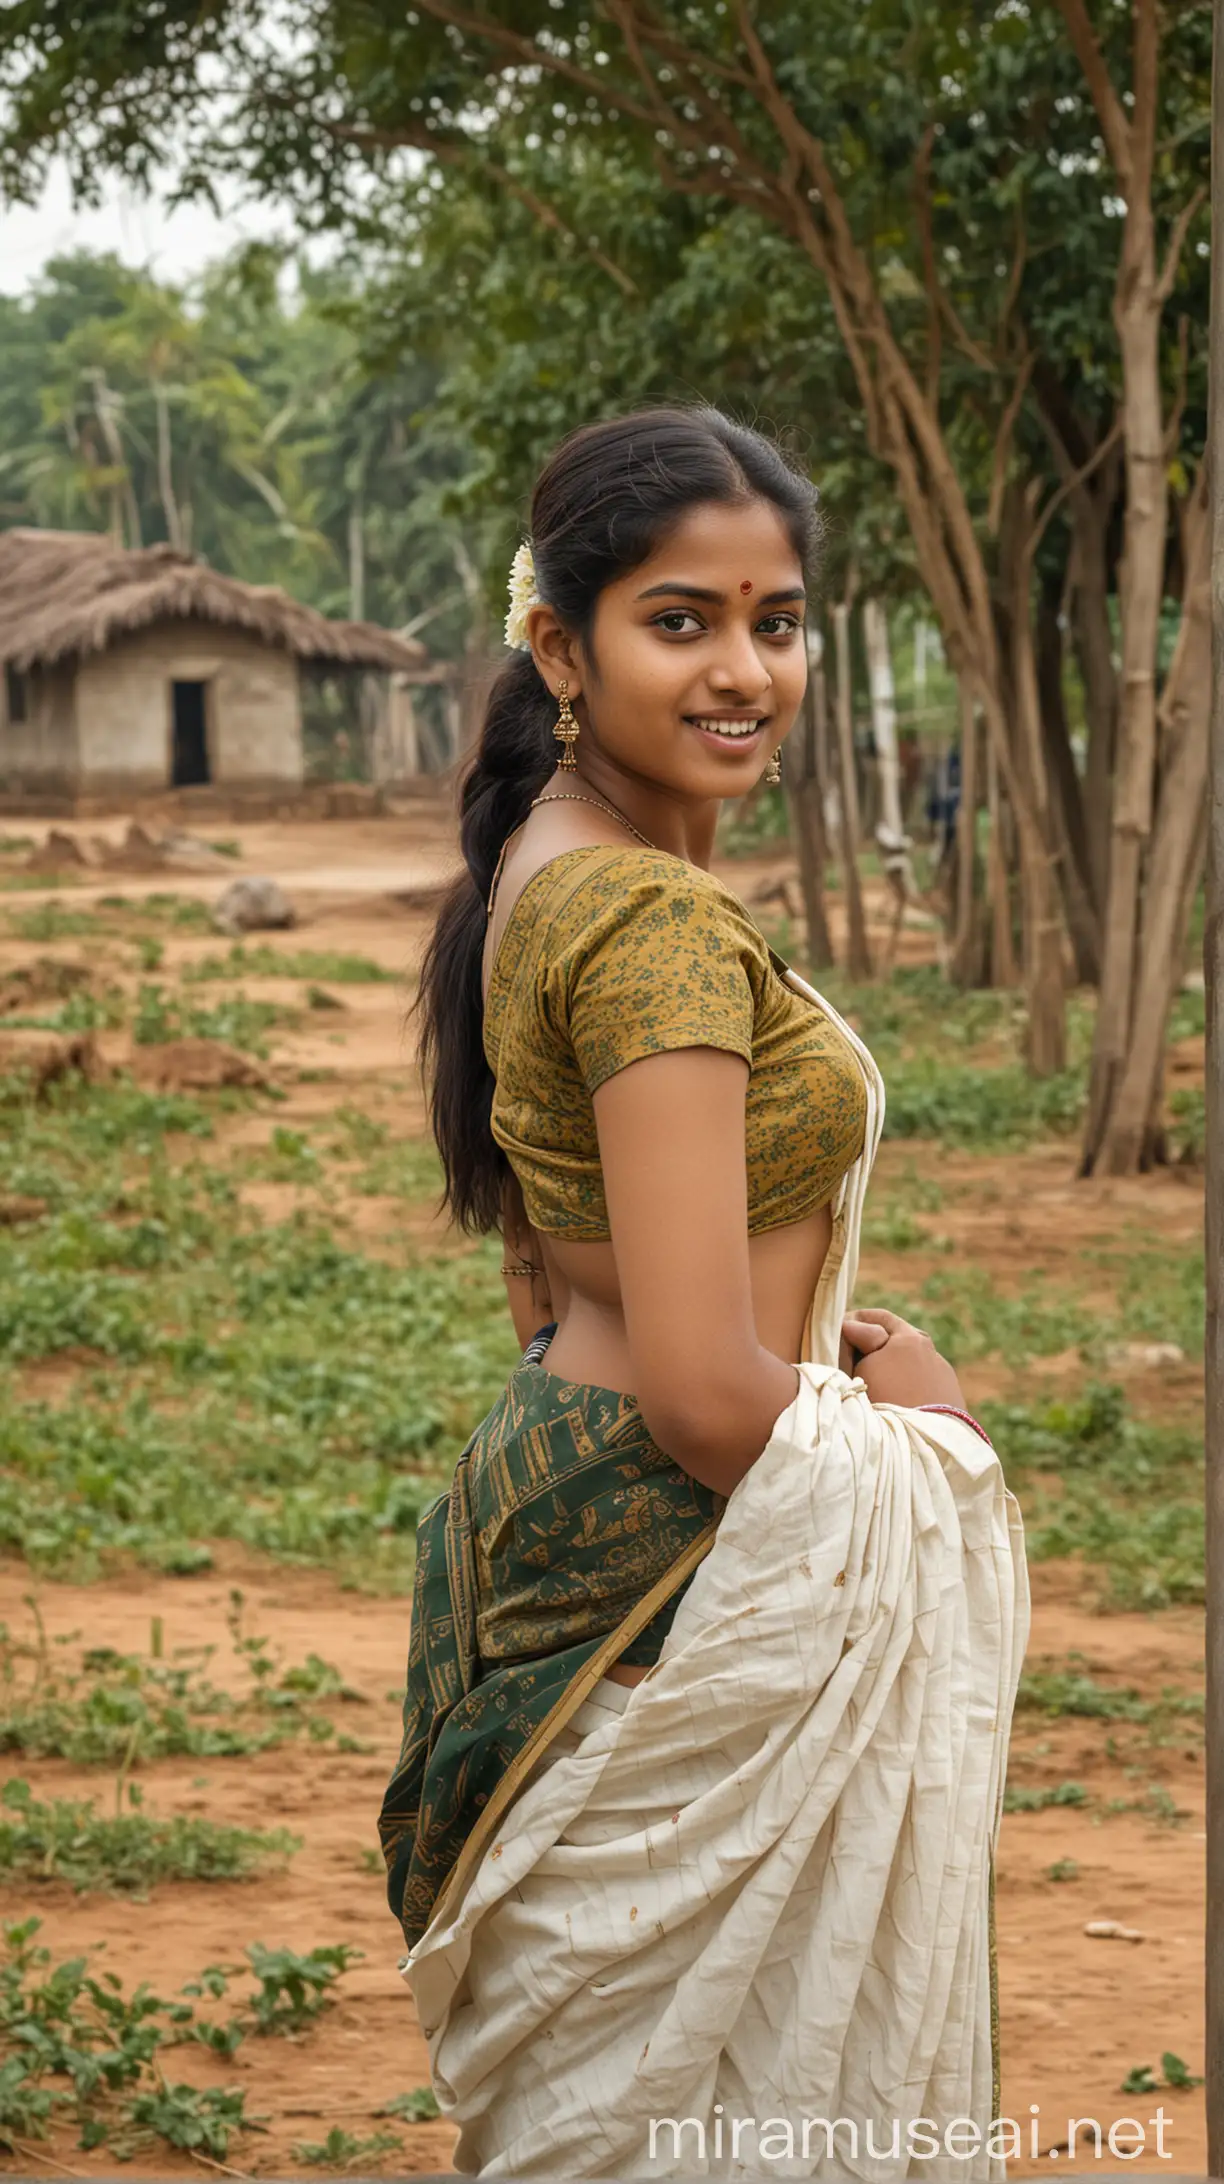 Beautiful South Indian Woman in Traditional Attire Against Village Backdrop